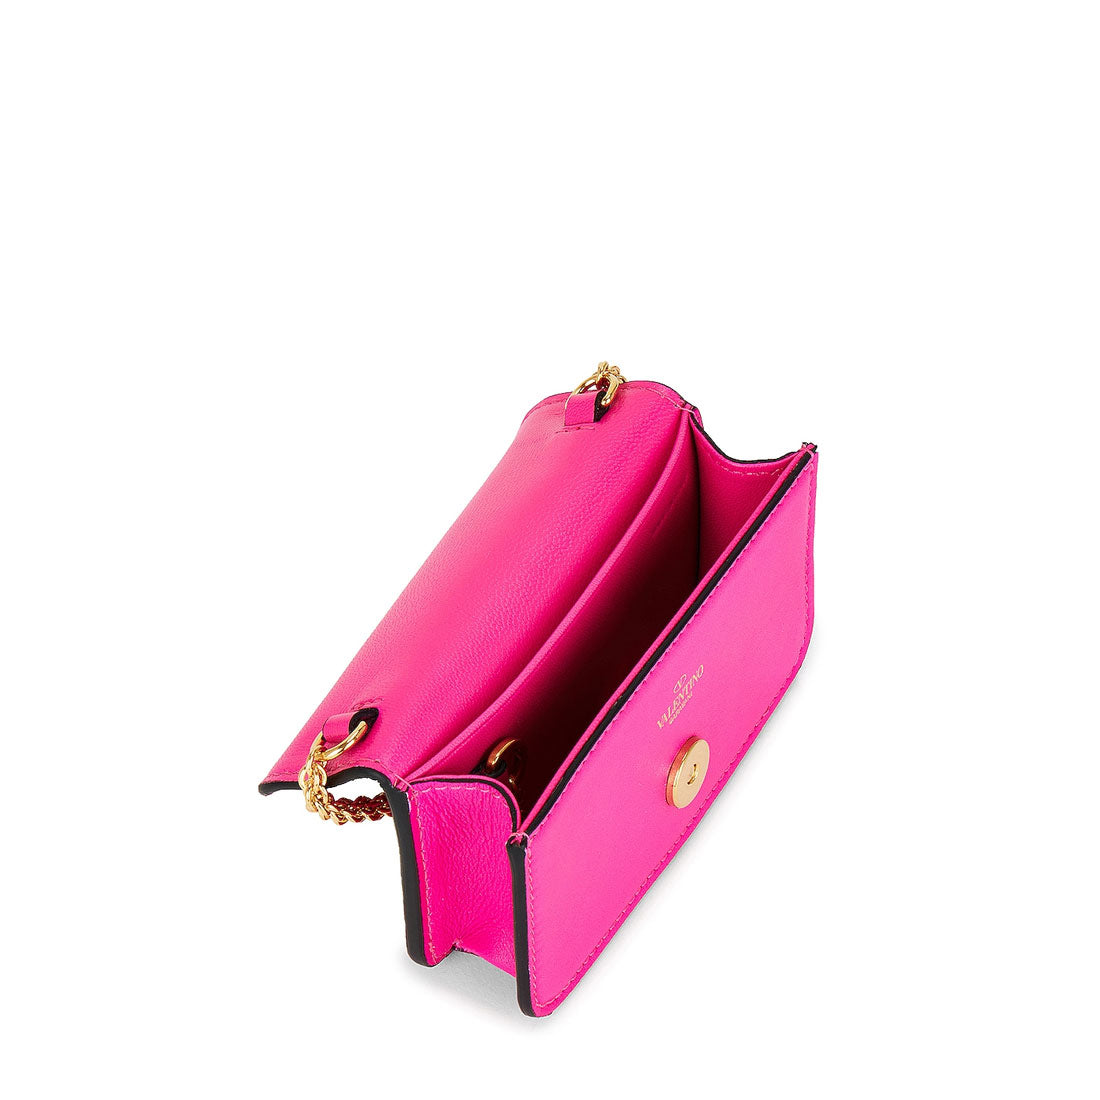 Loco' Micro Bag in Pink Leather